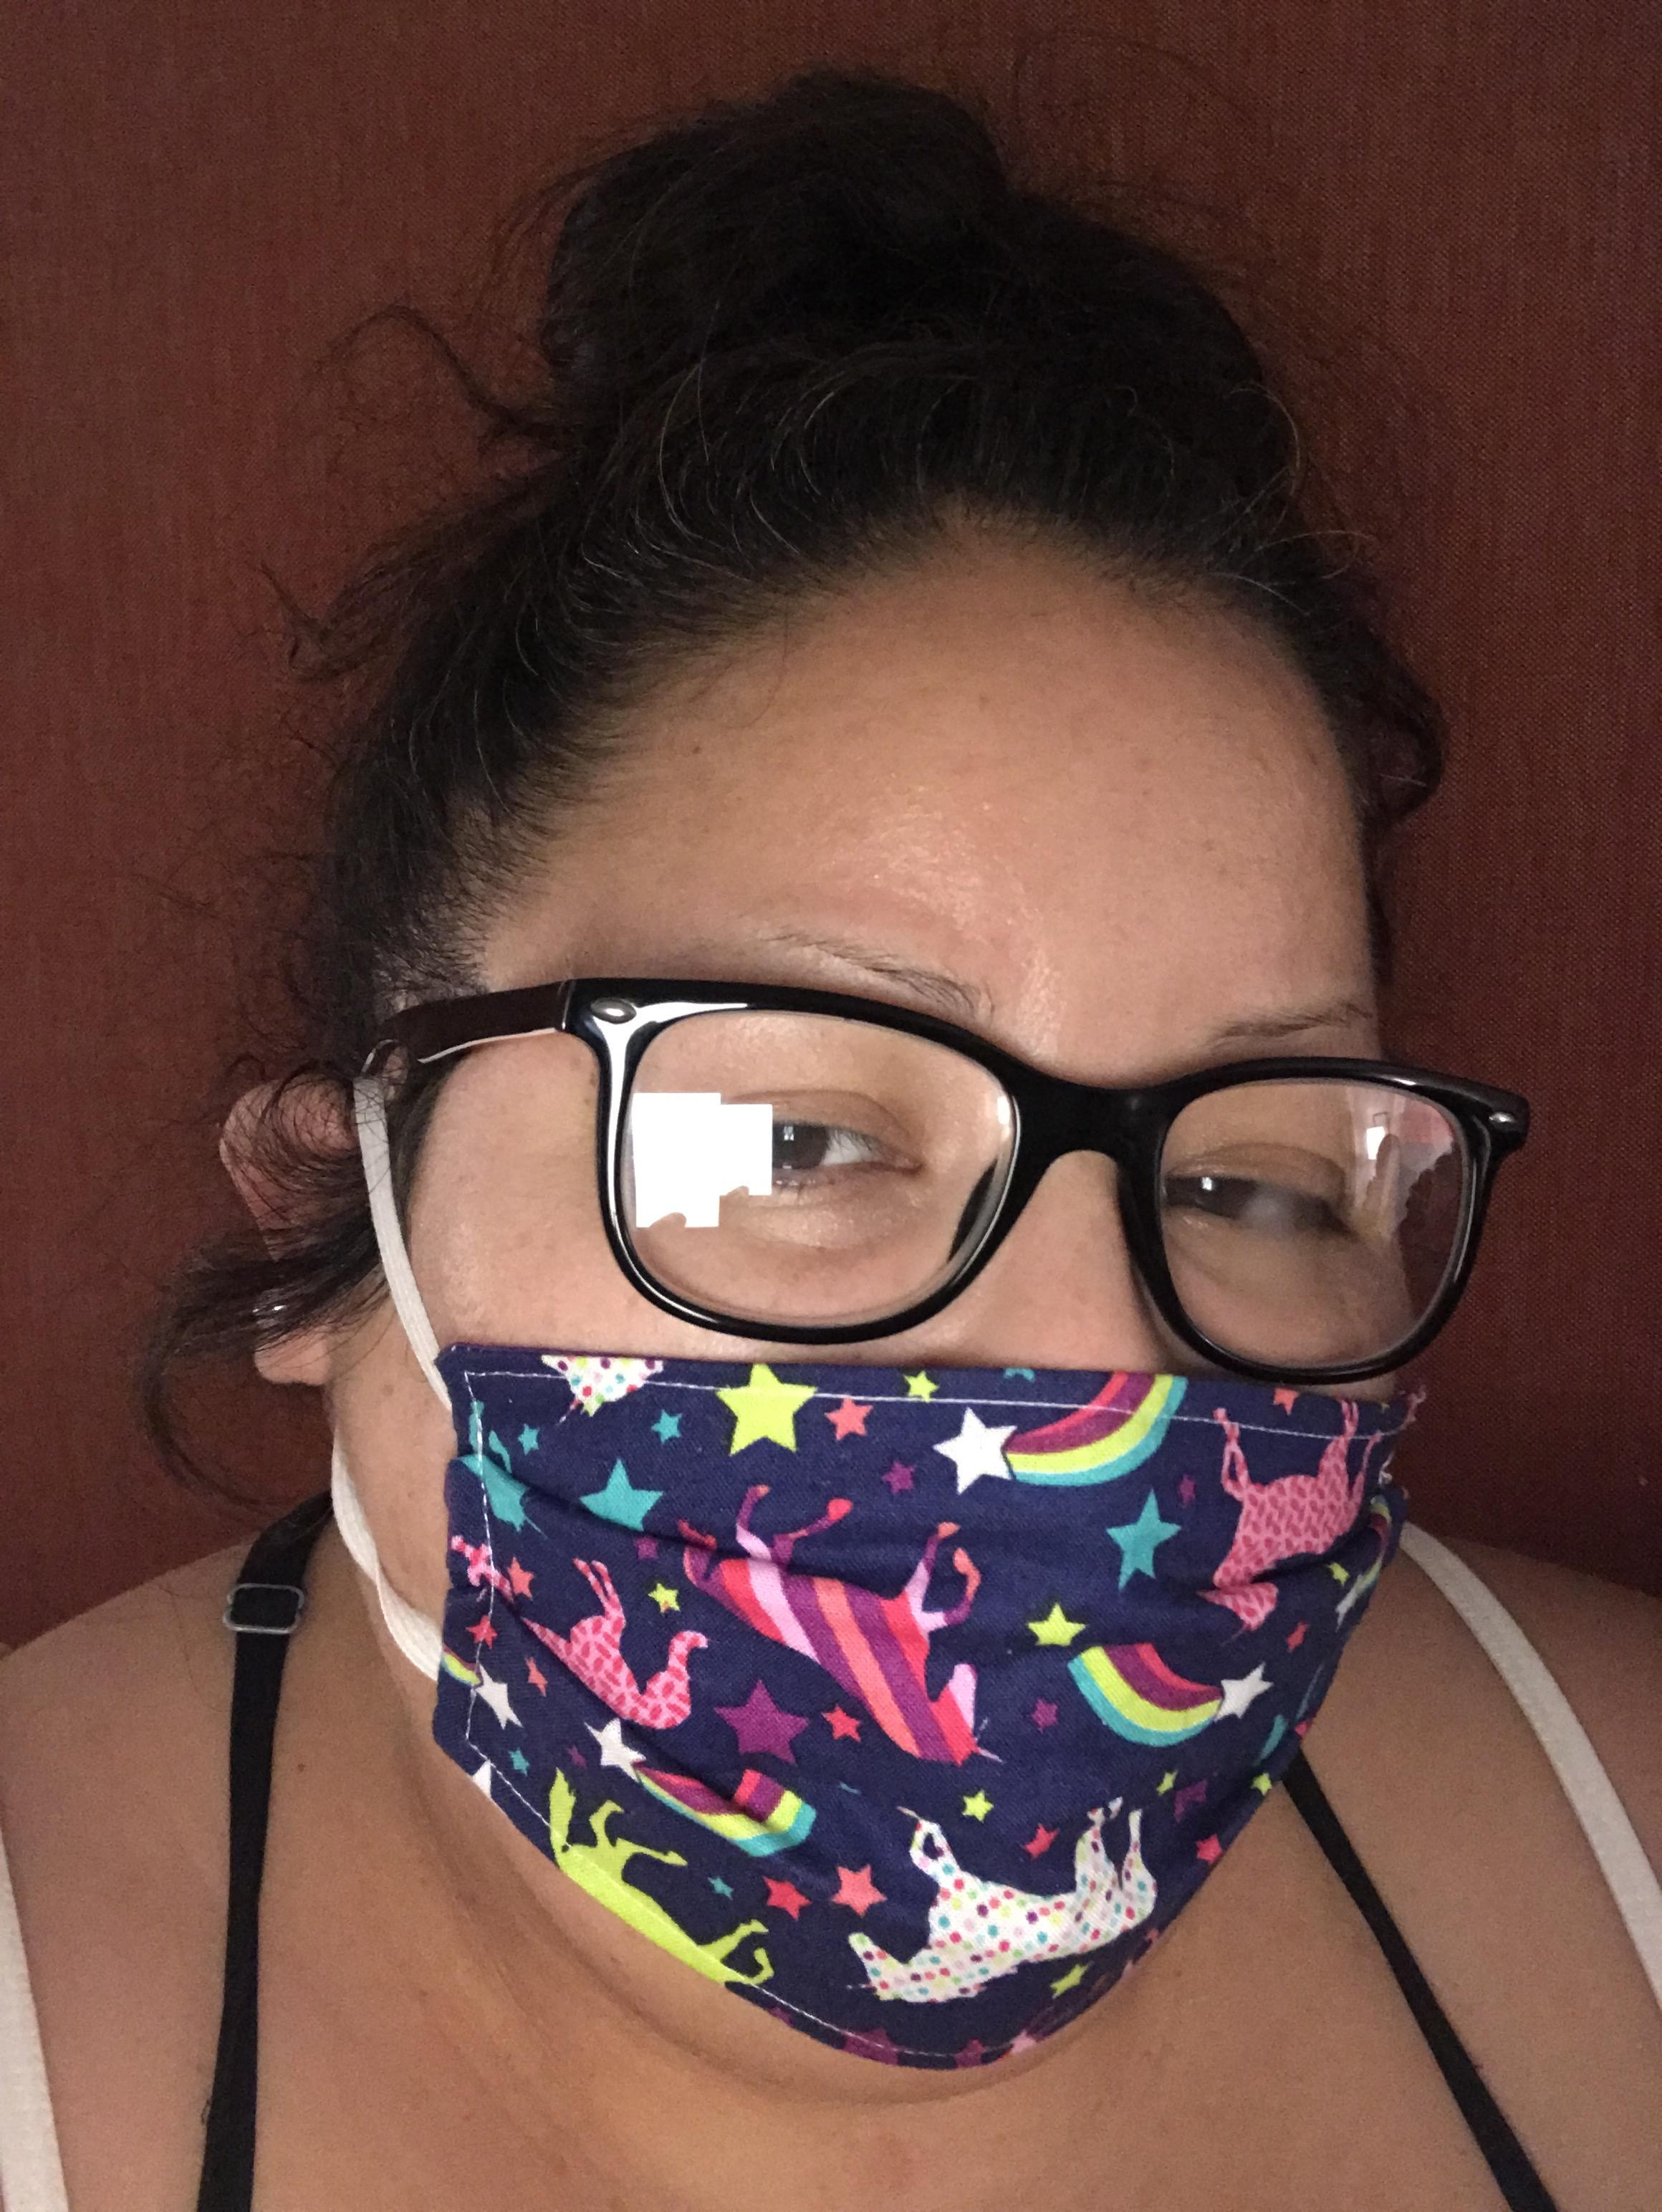 Selfie of a woman with a mask and glasses.